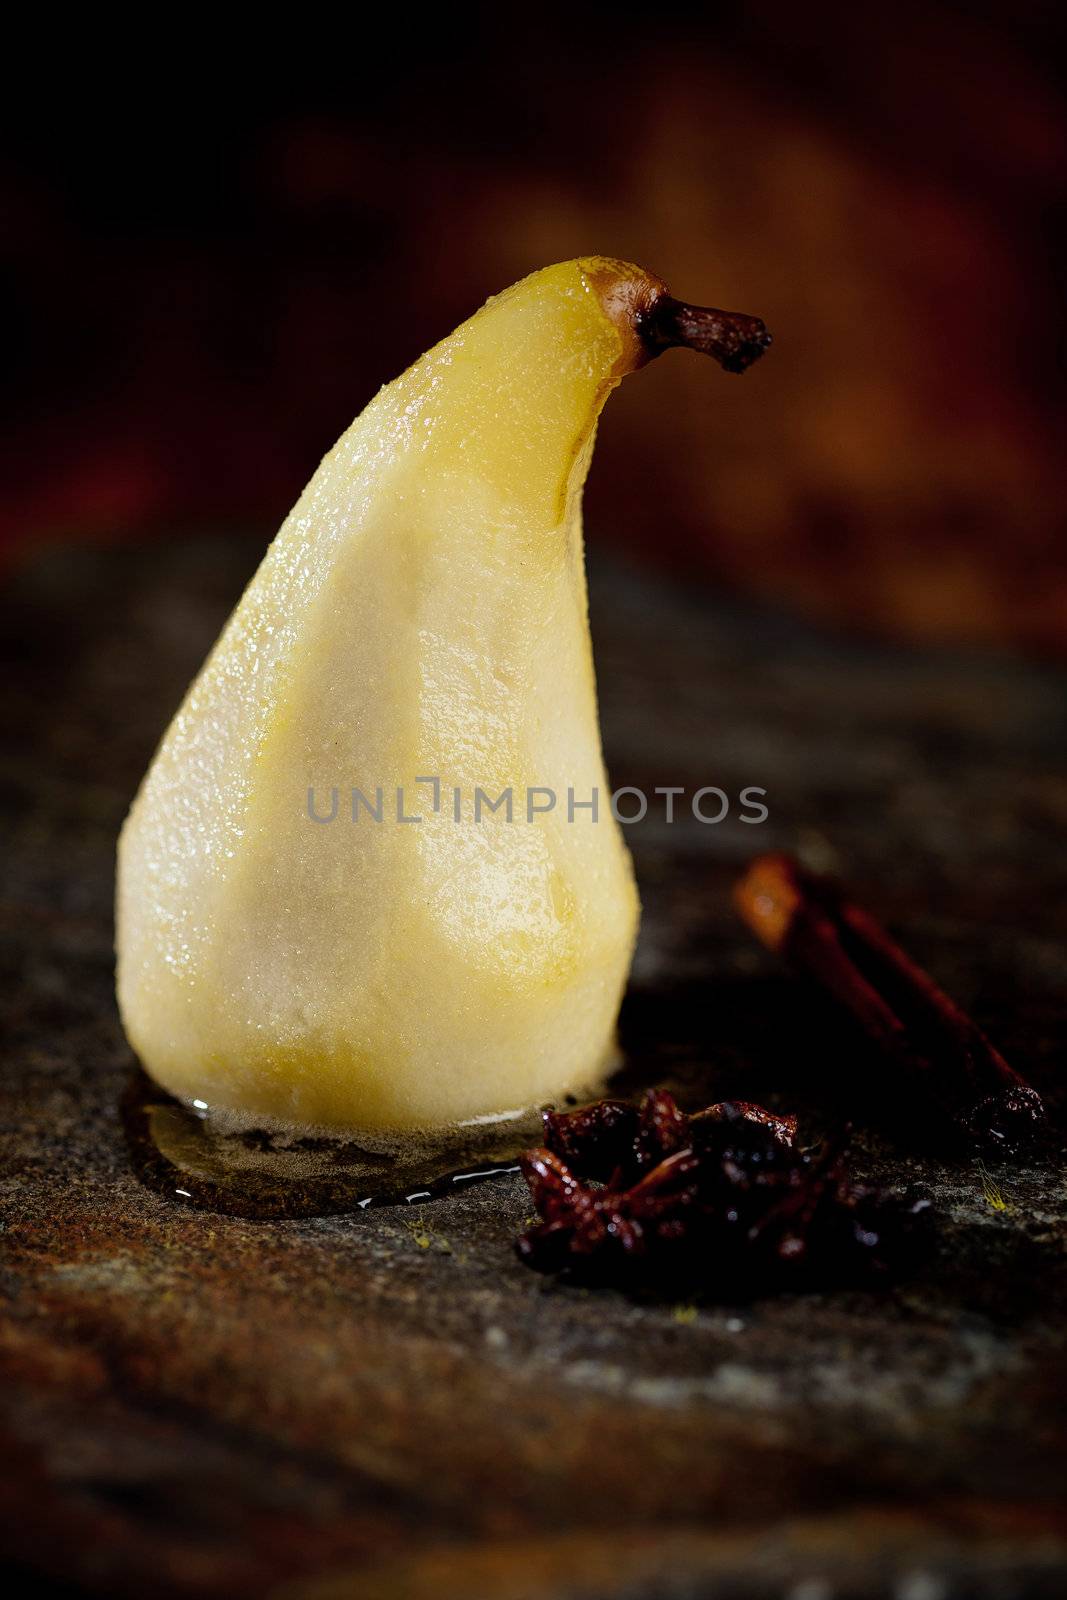 Poached pear by Fotosmurf